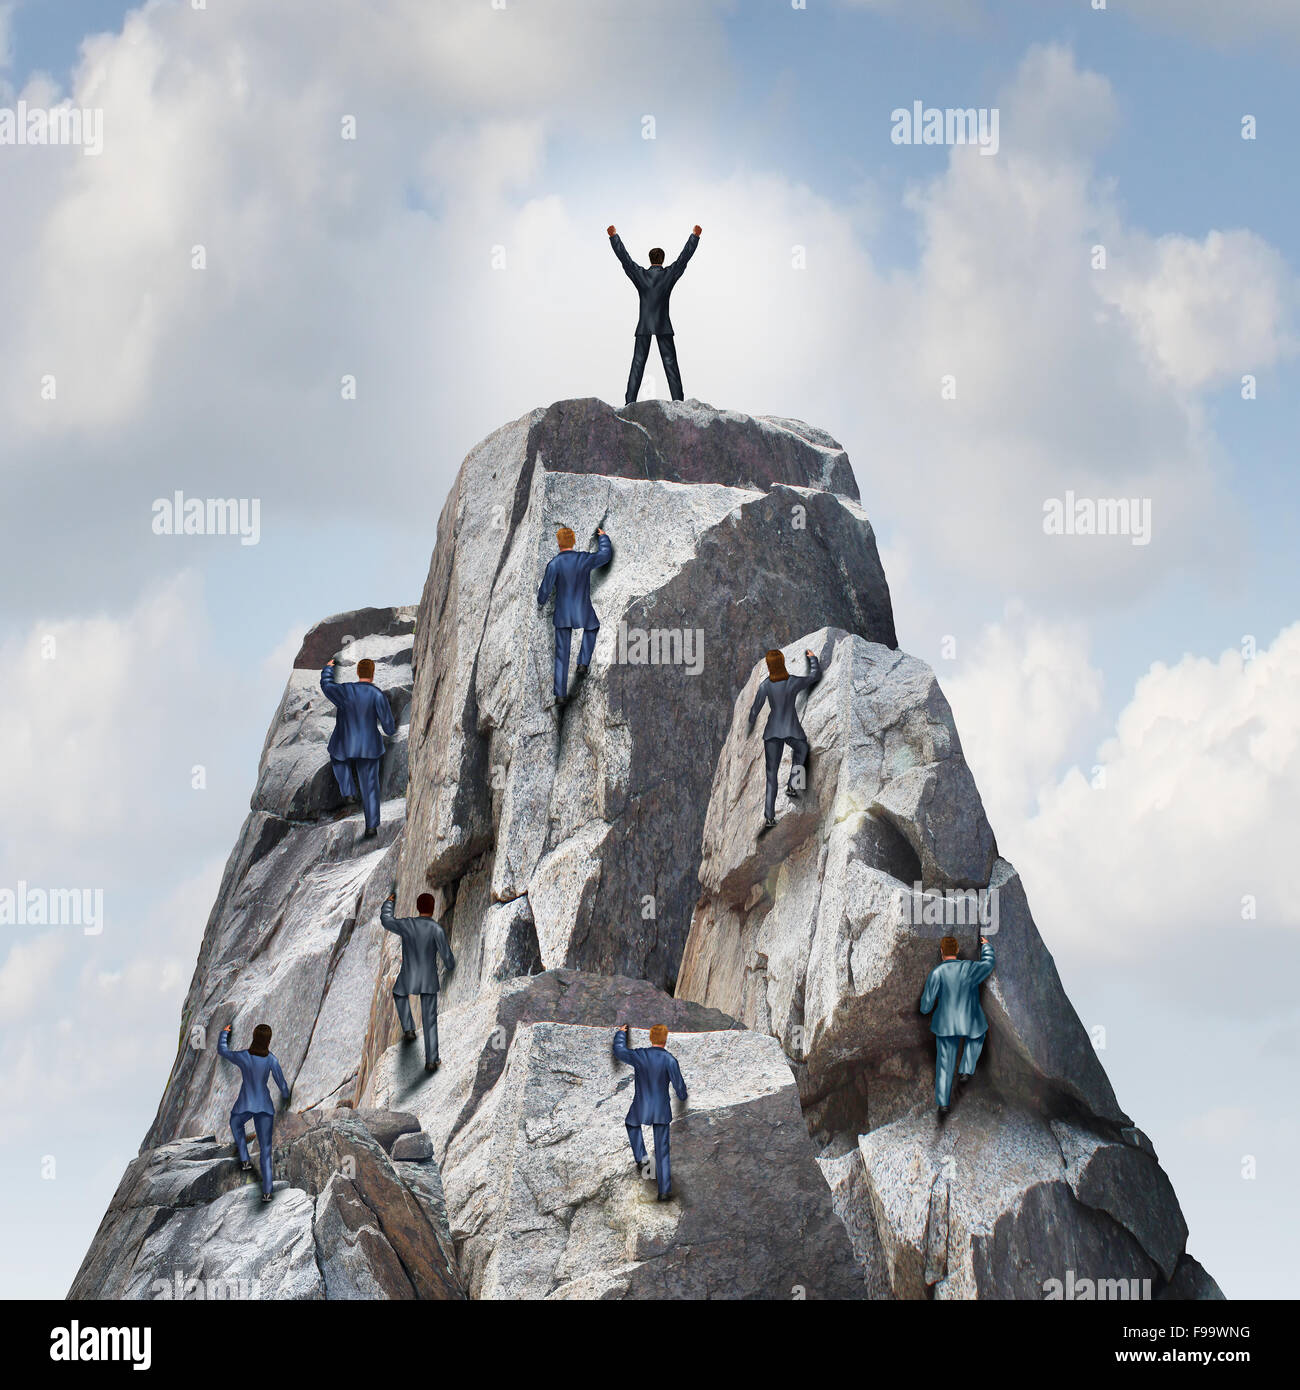 Climb to the top career business concept as a group of businesspeople climbing a rock mountain with one individual leader reachi Stock Photo